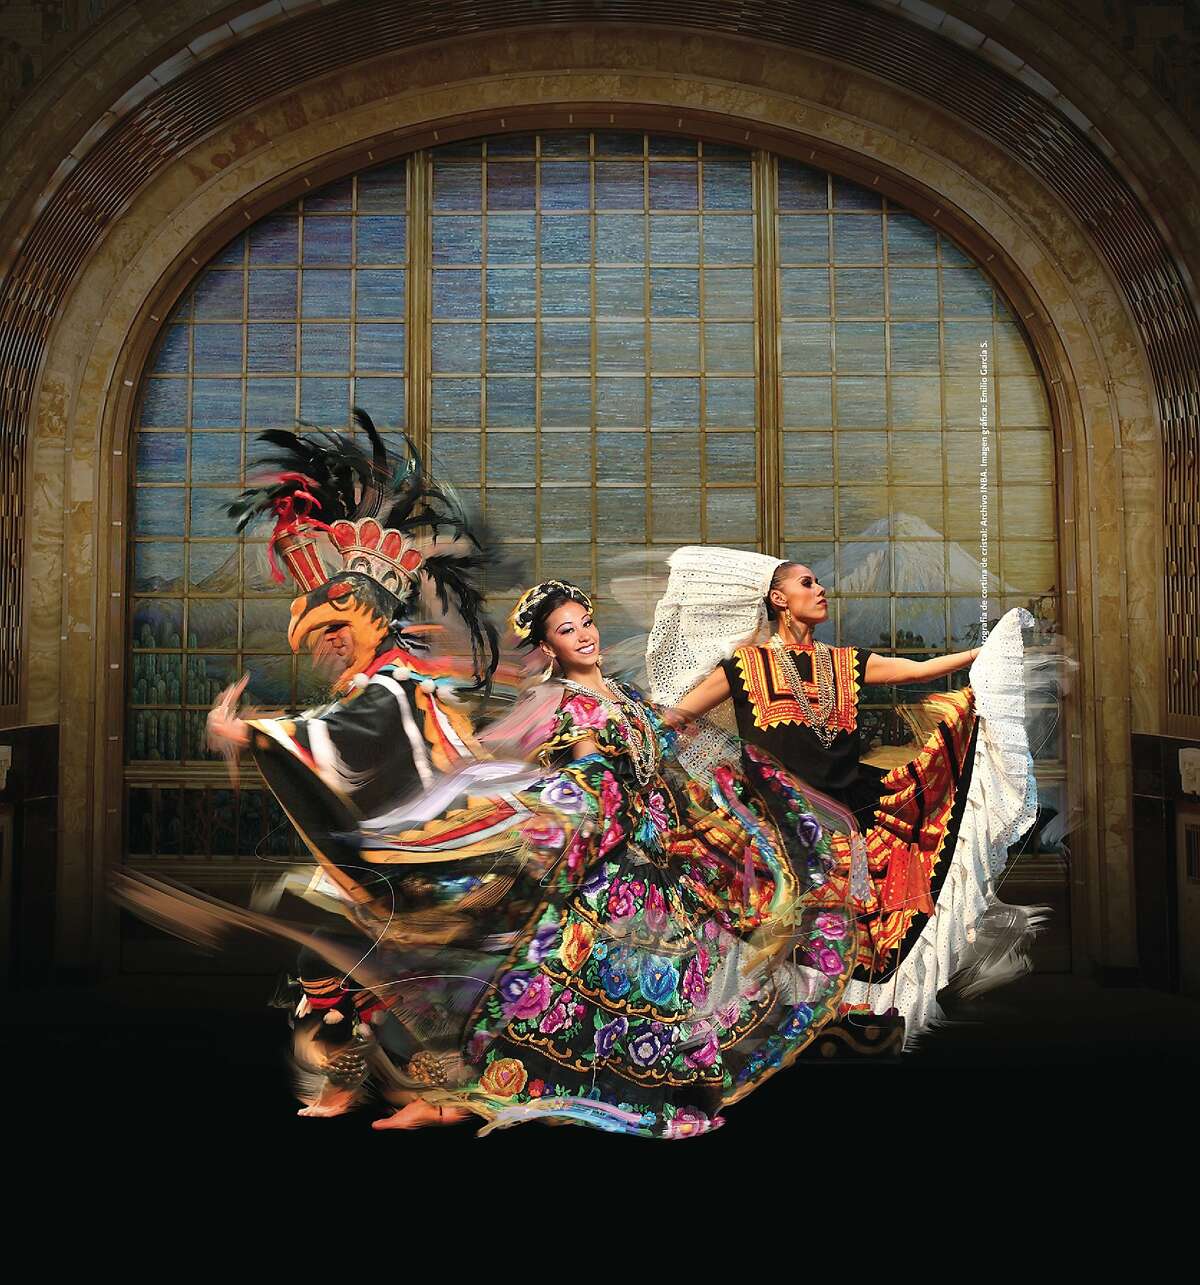 Caption: members of Ballet Folklorico de Amalia Hernandez perform Sunday at Yerba Buena Center for the Arts Theater, an entry in the MEX I AM Festival, a celebration of Mexican culture, which runs through Aug. 5. Photo courtesy Ballet Folklorico de Amalia Hernandez